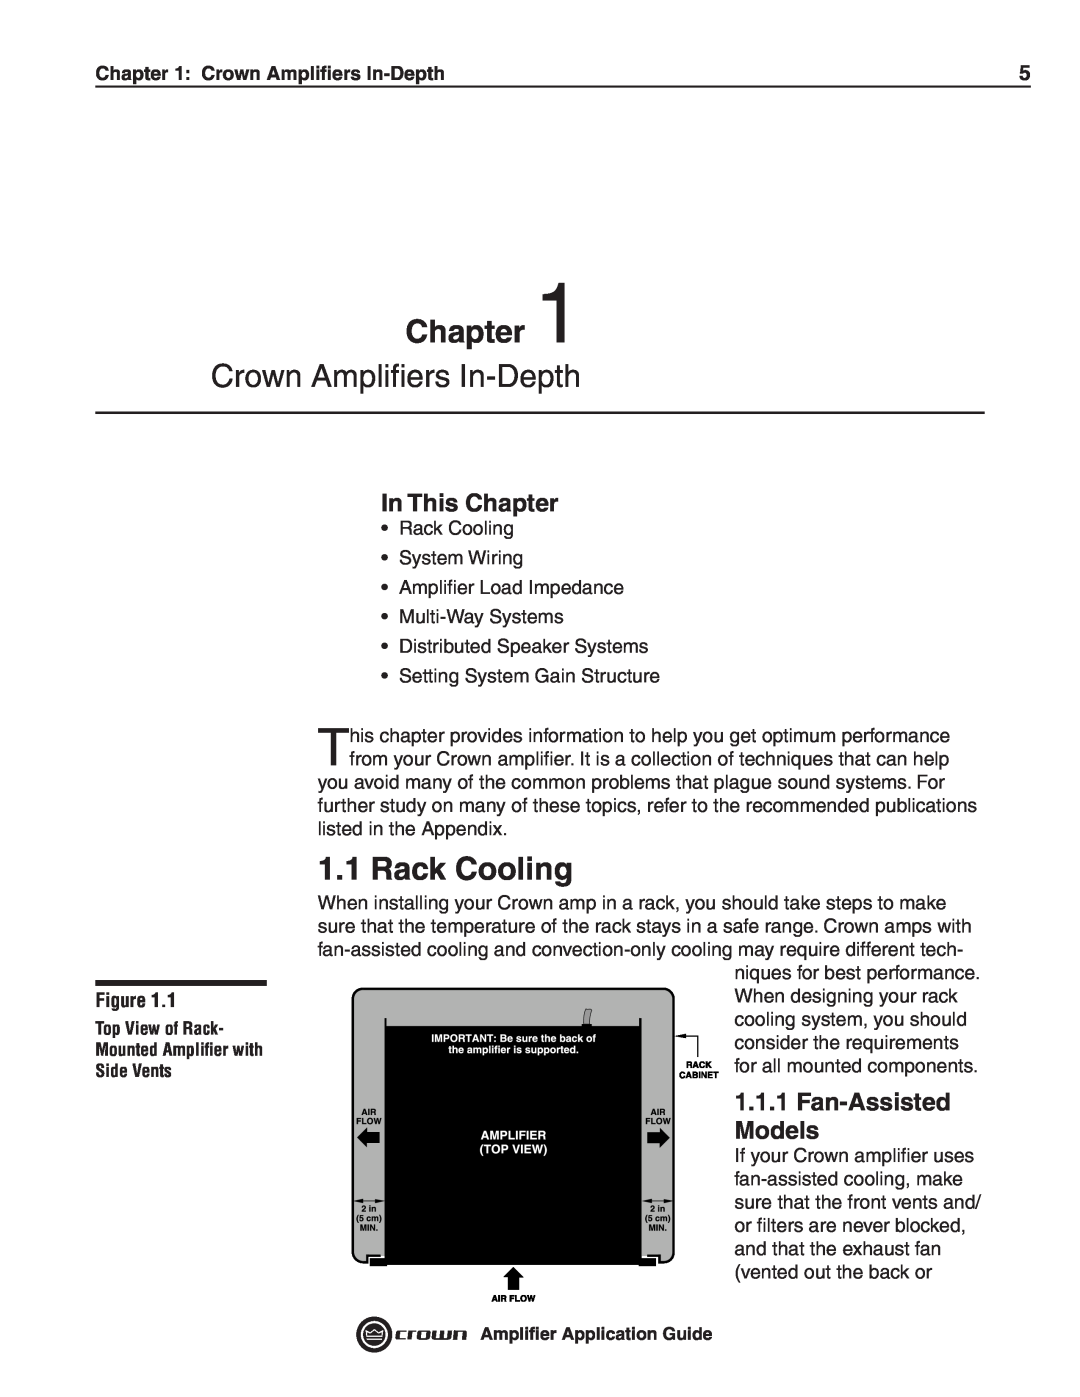 Crown Audio 133472-1A manual Crown Ampliﬁers In-Depth, Rack Cooling, In This Chapter, Fan-Assisted Models 